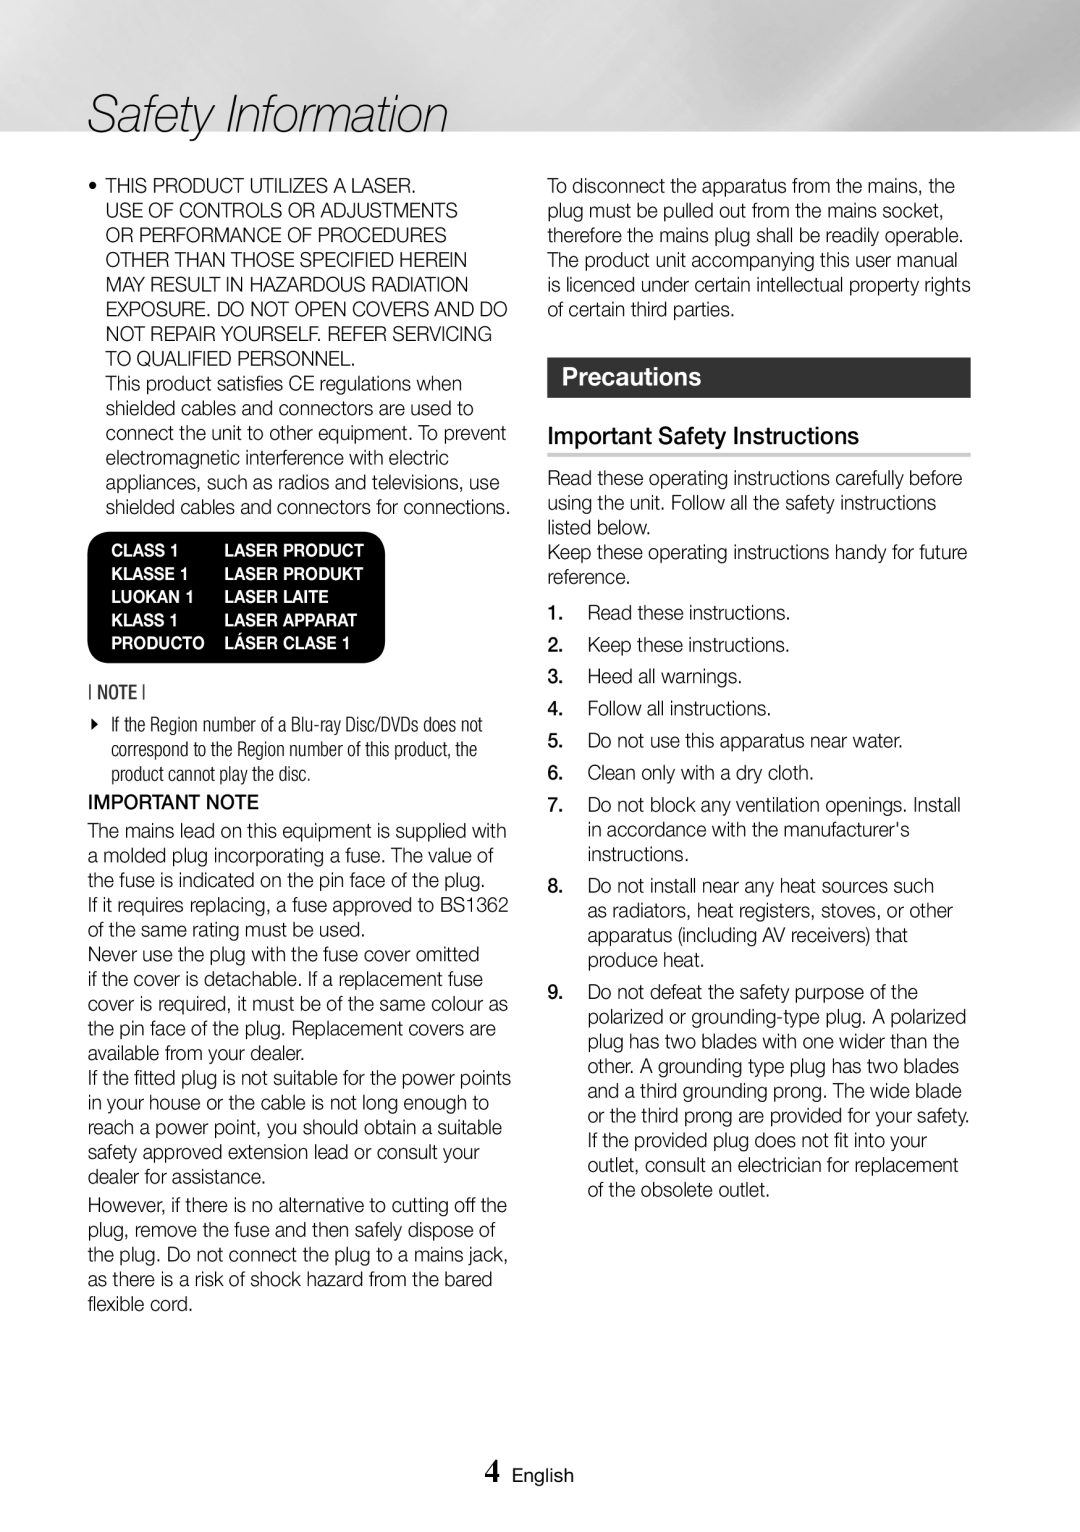 Samsung BD-J7500/EN manual Precautions, Important Safety Instructions, Safety Information 